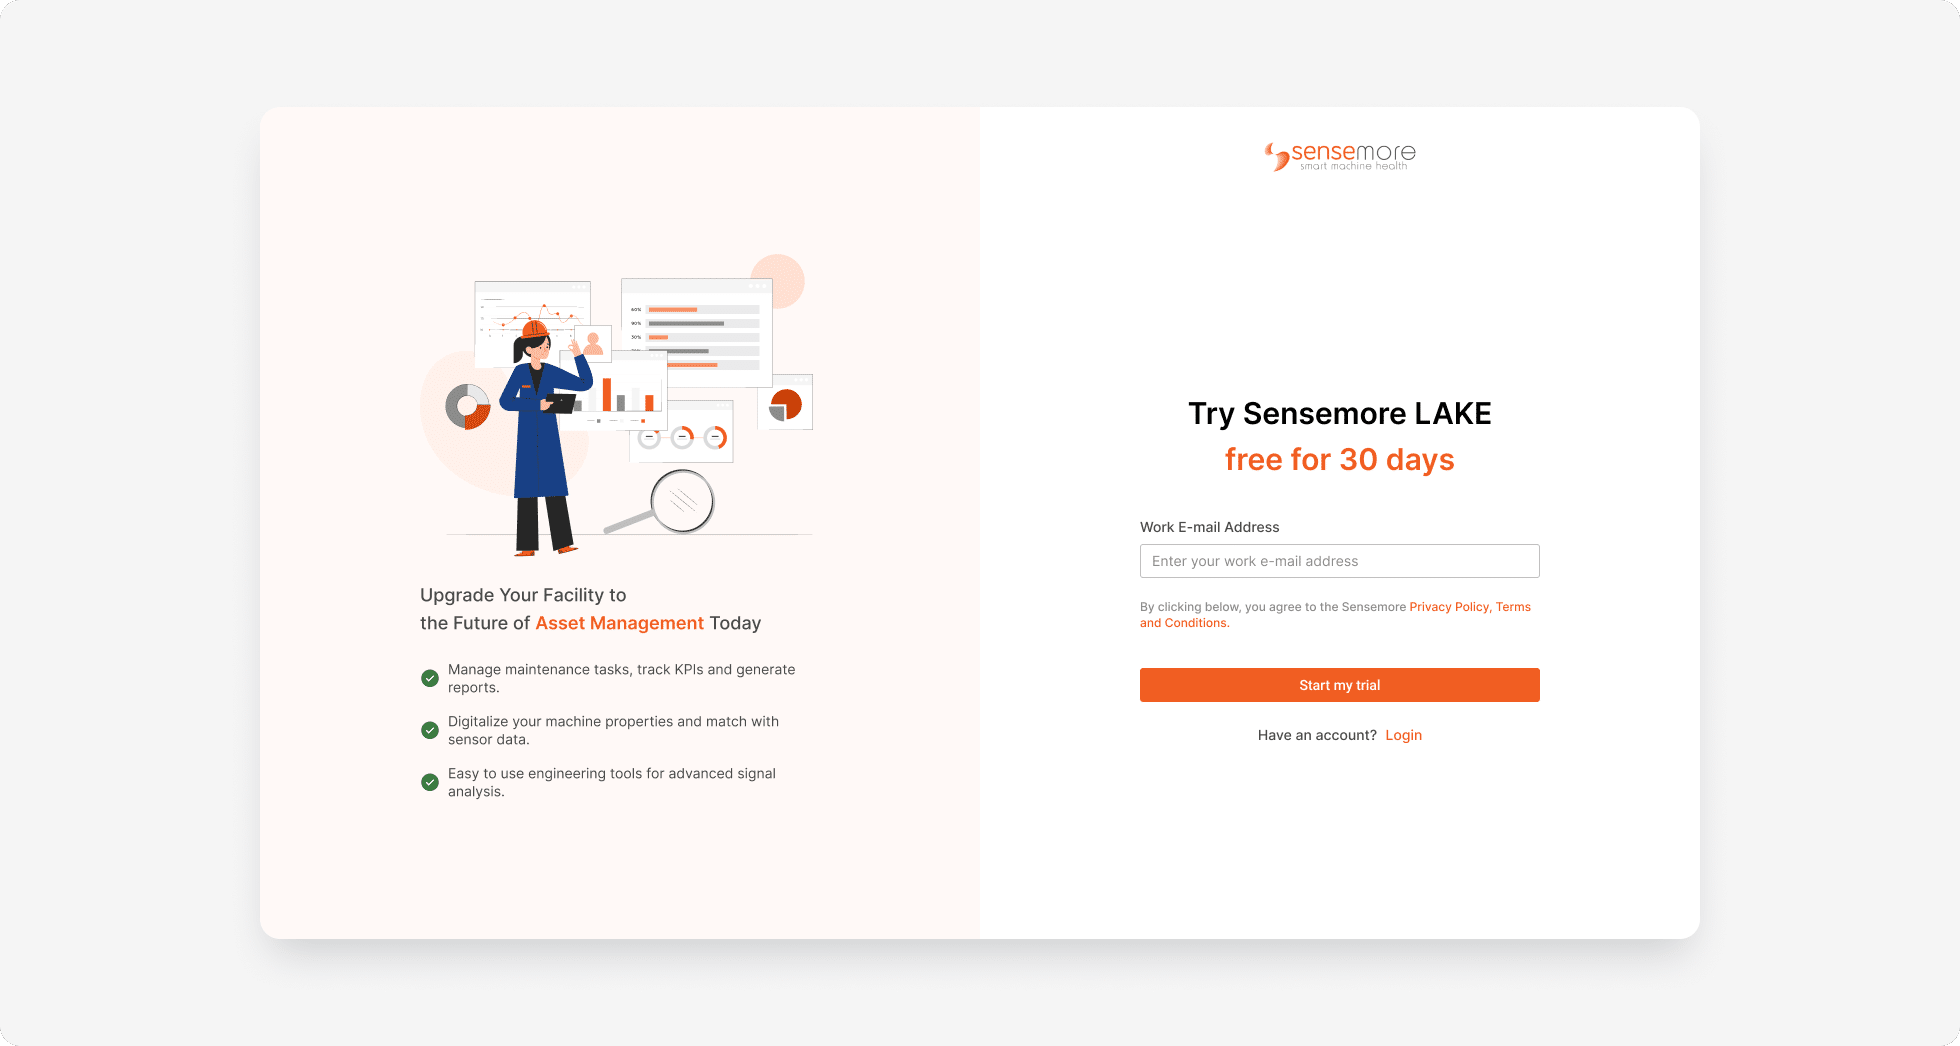 New Onboarding for 30-days Free Trial